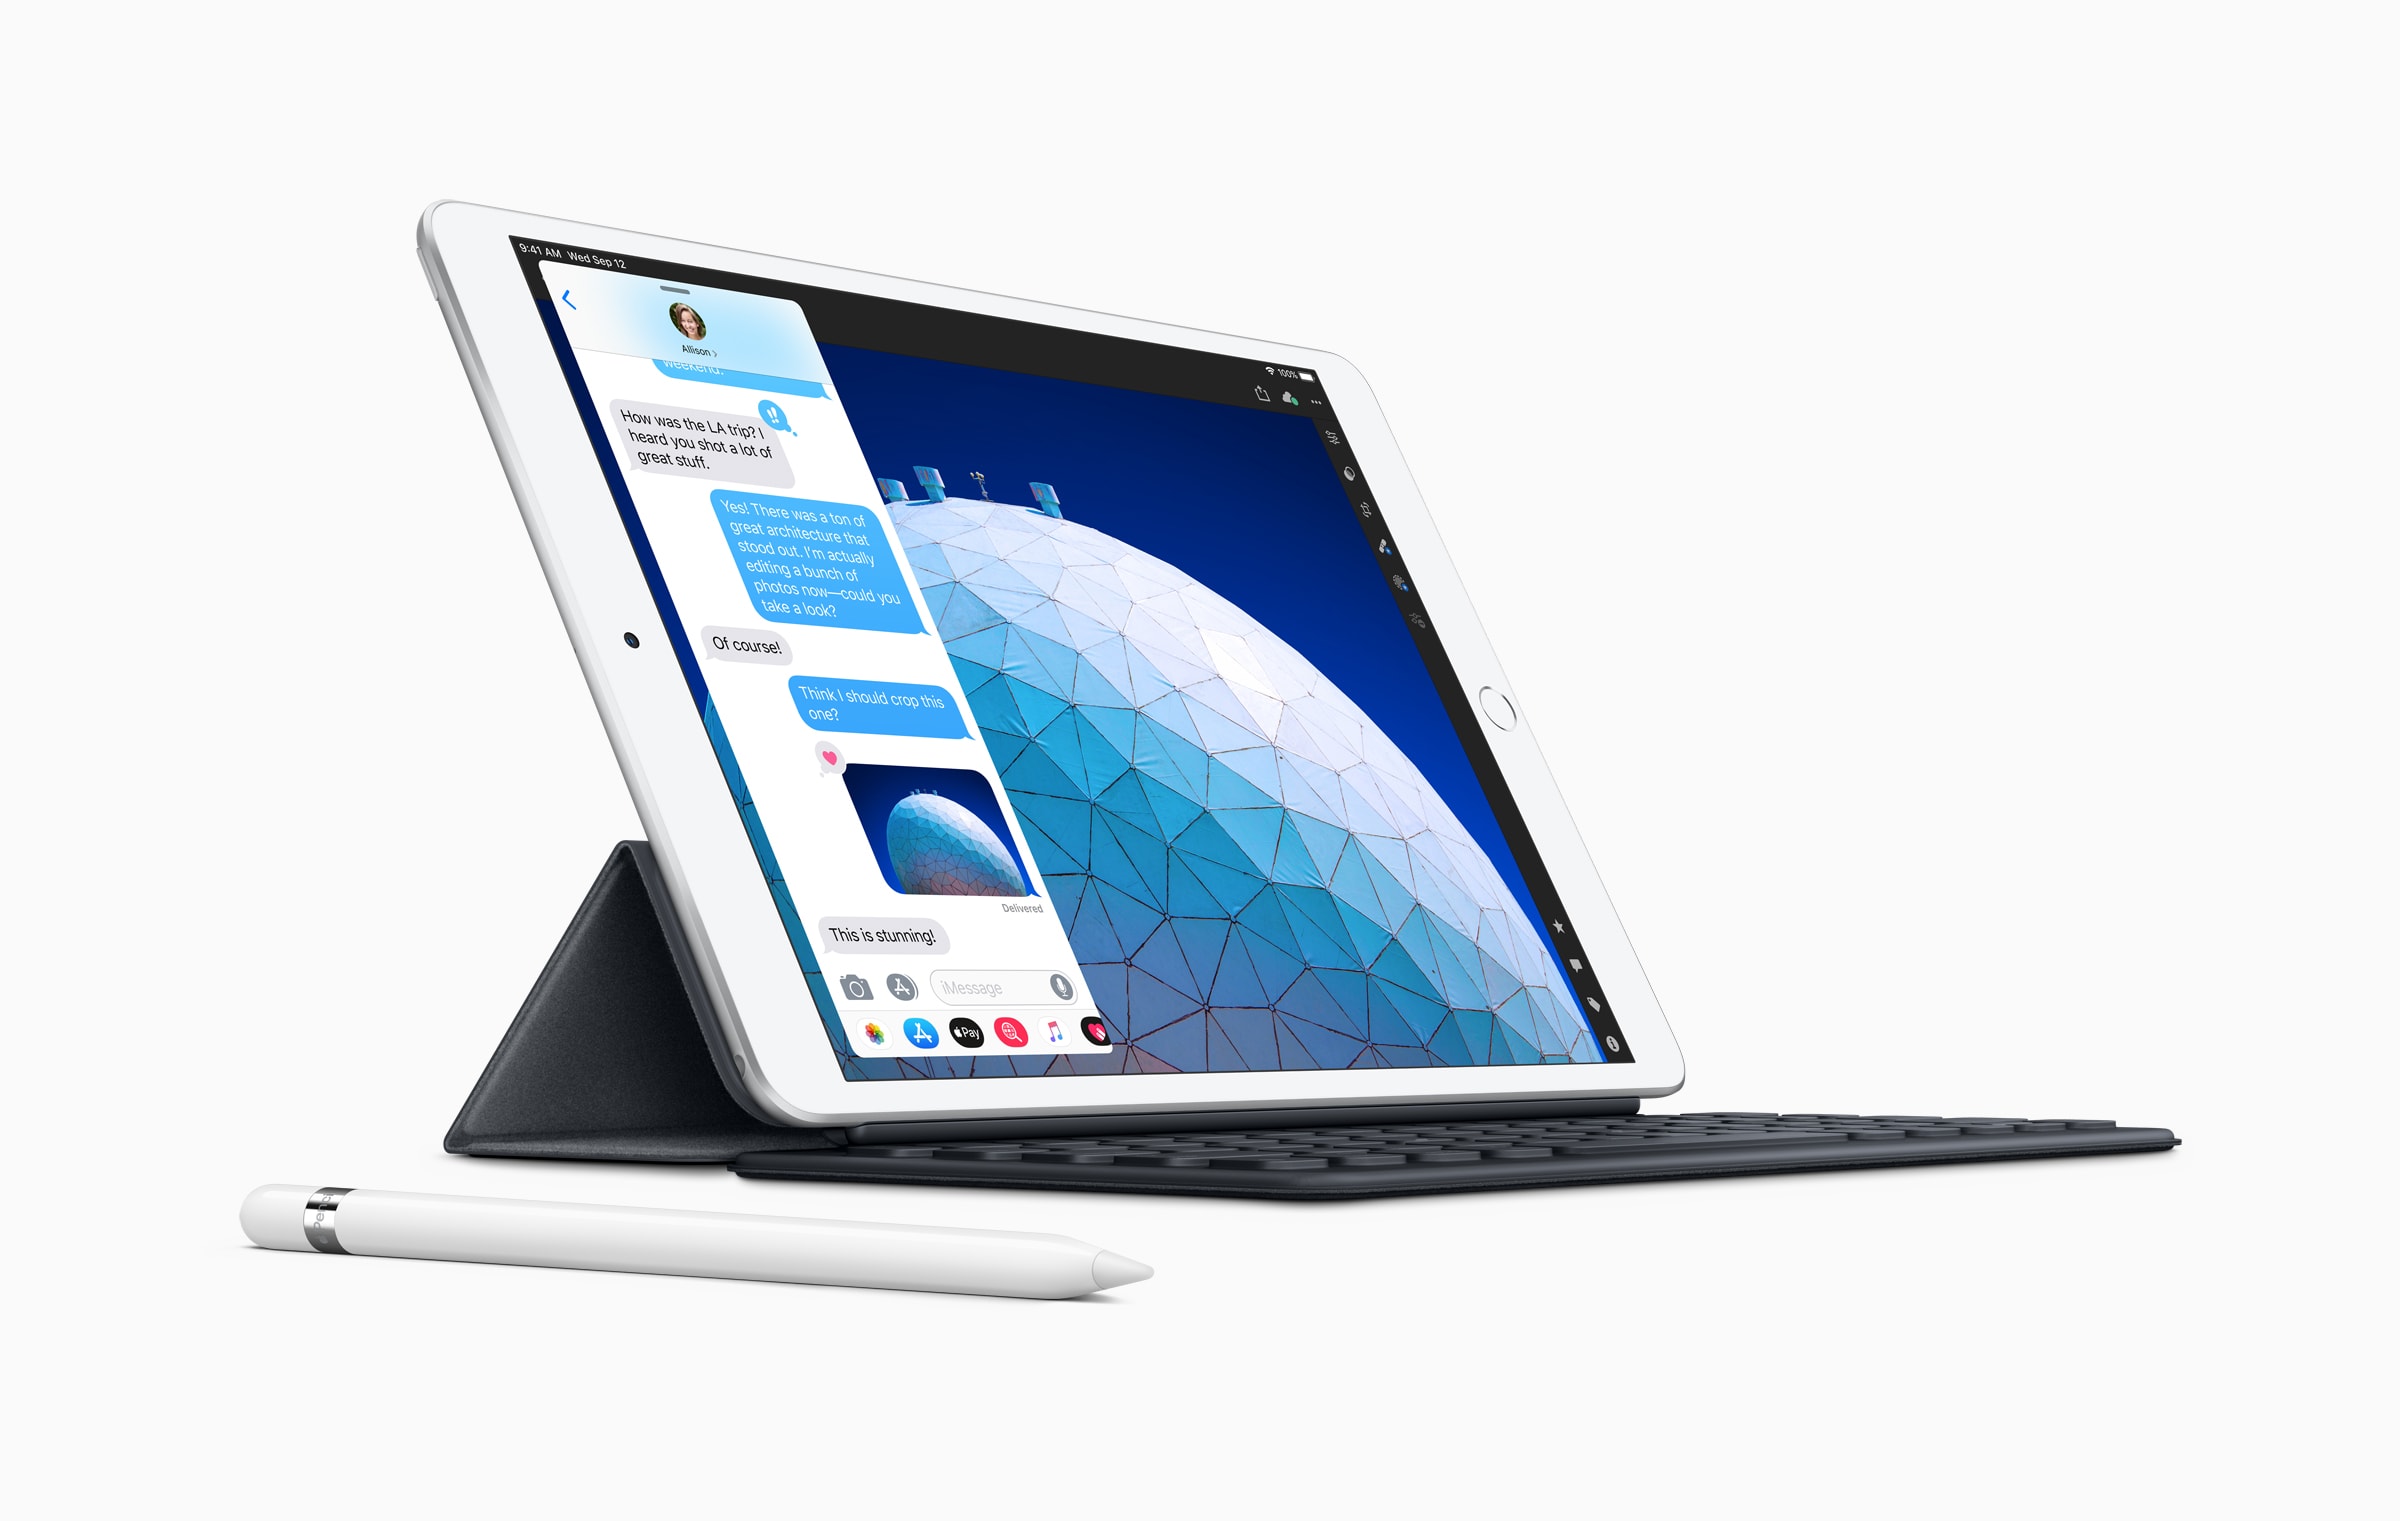 iPad Air aside with Smart Keyboard and Apple Pencil on the table